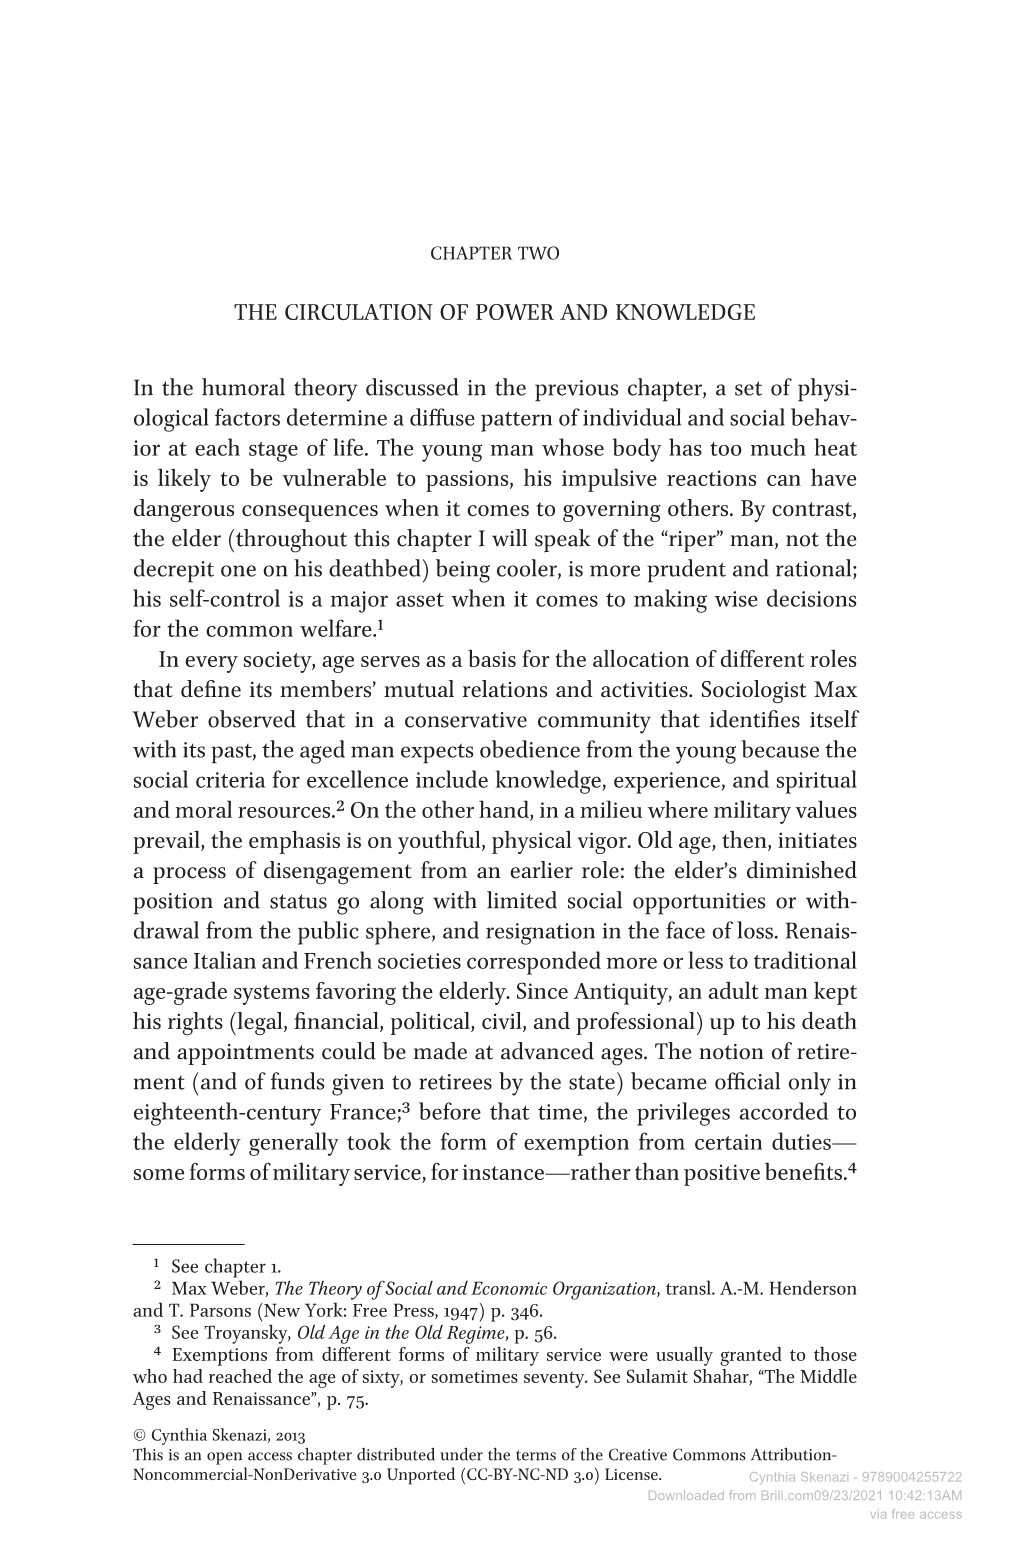 The Circulation of Power and Knowledge in the Humoral Theory